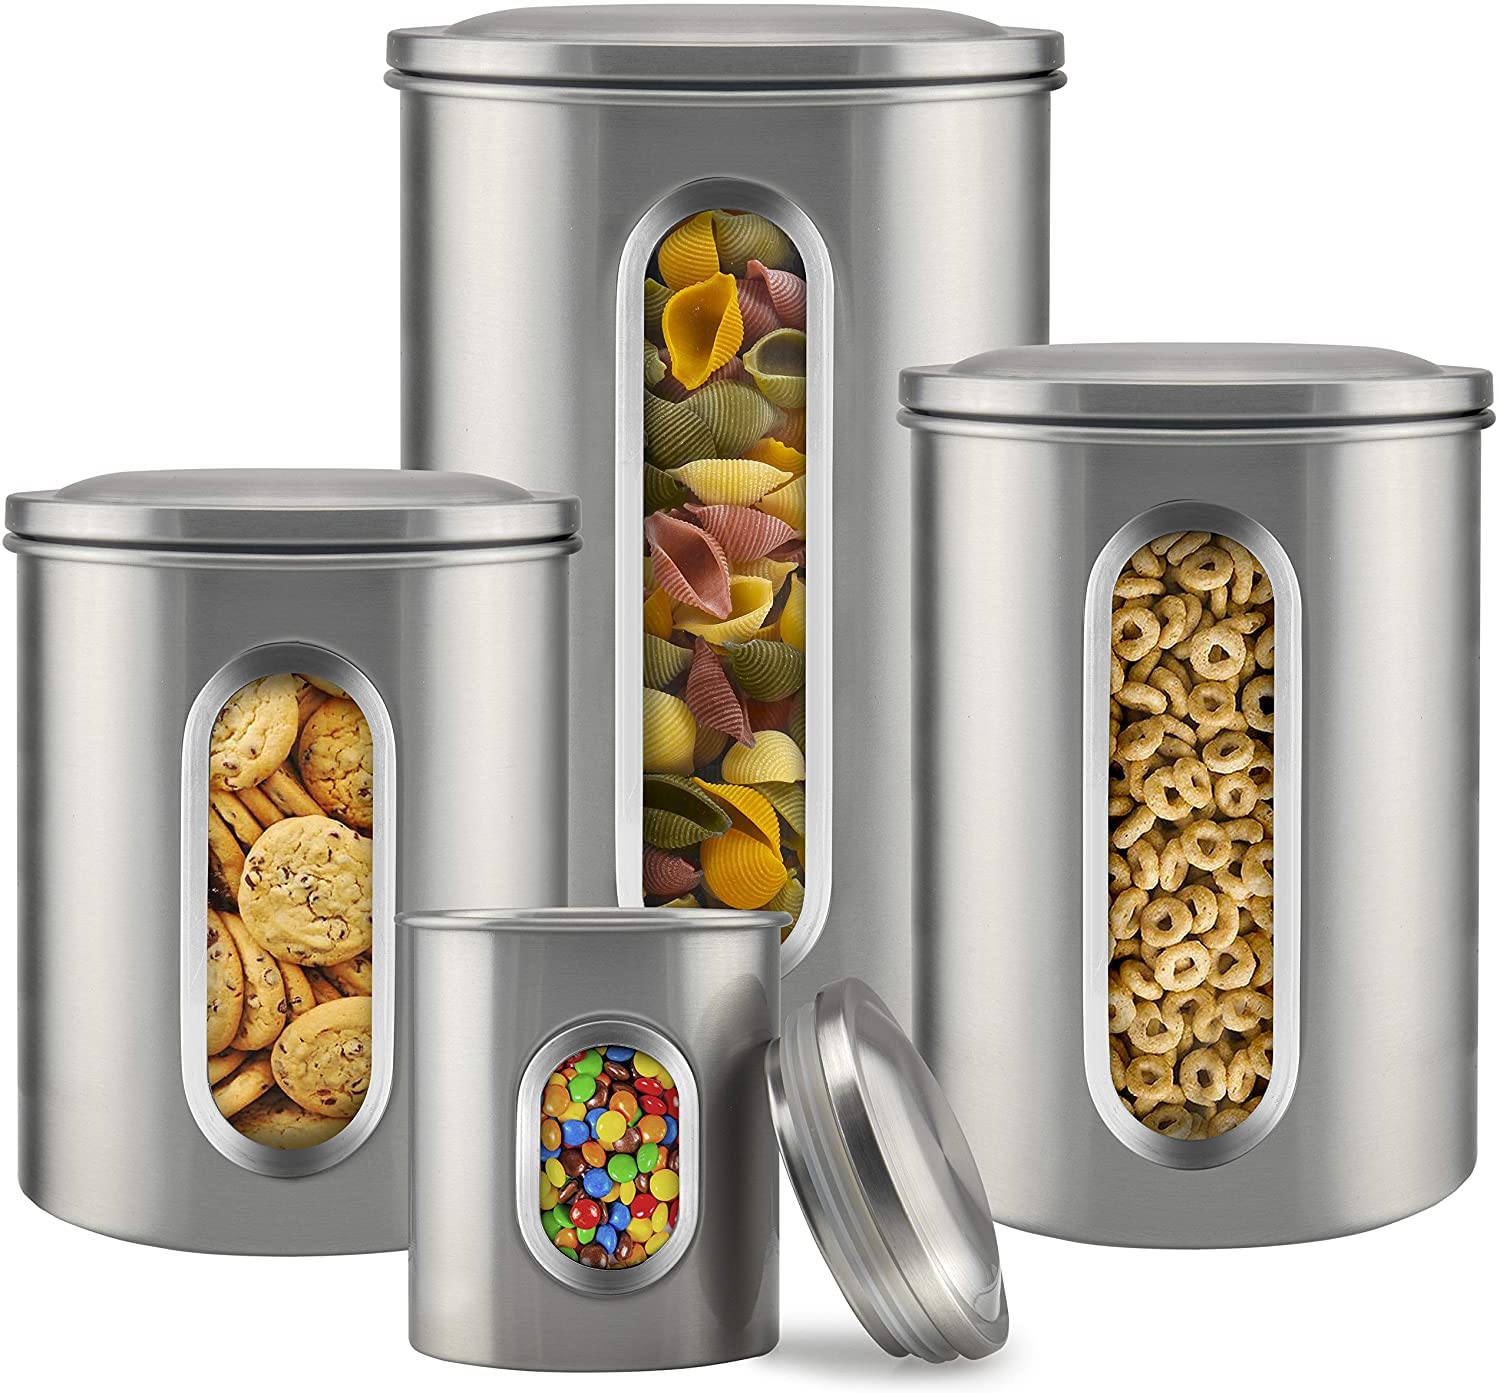 Canister Sets for Kitchen Counter - Kitchen Decor Sets - Brushed Stainless Steel - Sugar Containers for Countertop - Flour Sugar Canister Set - Sugar Jars for Kitchen - Kitchen Canisters Set of 4  - Very Good